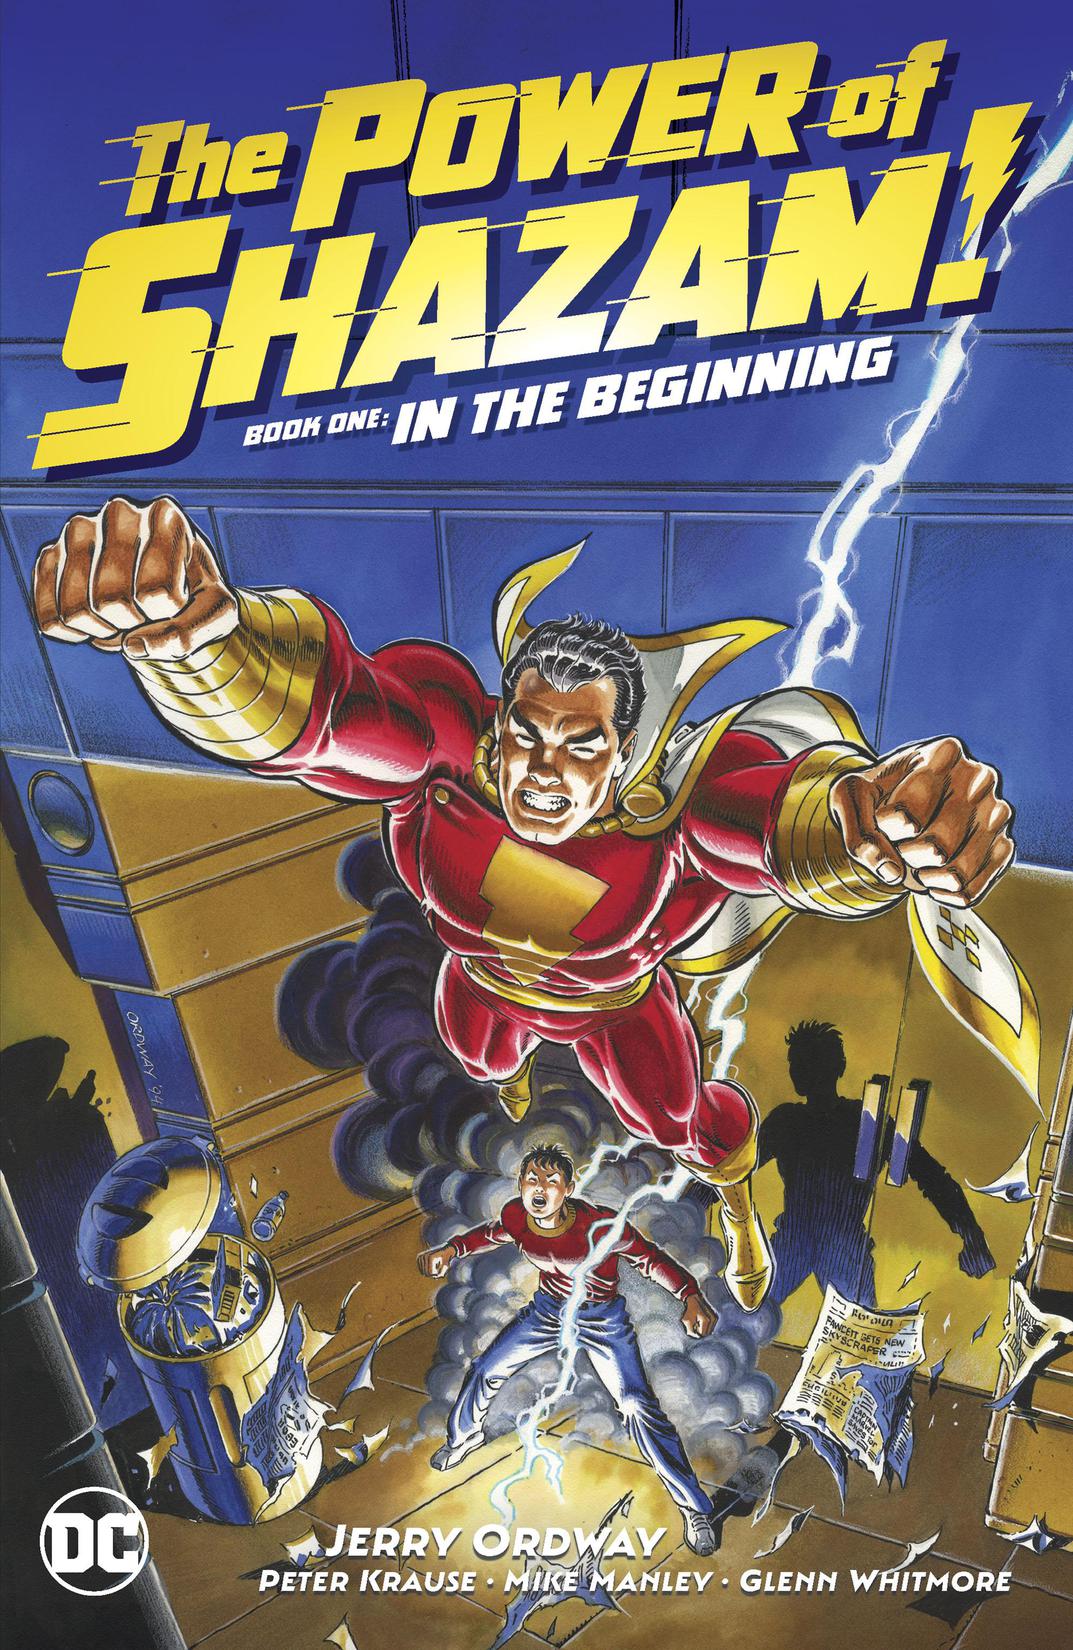 The Power of Shazam! Book 1: In the Beginning preview images